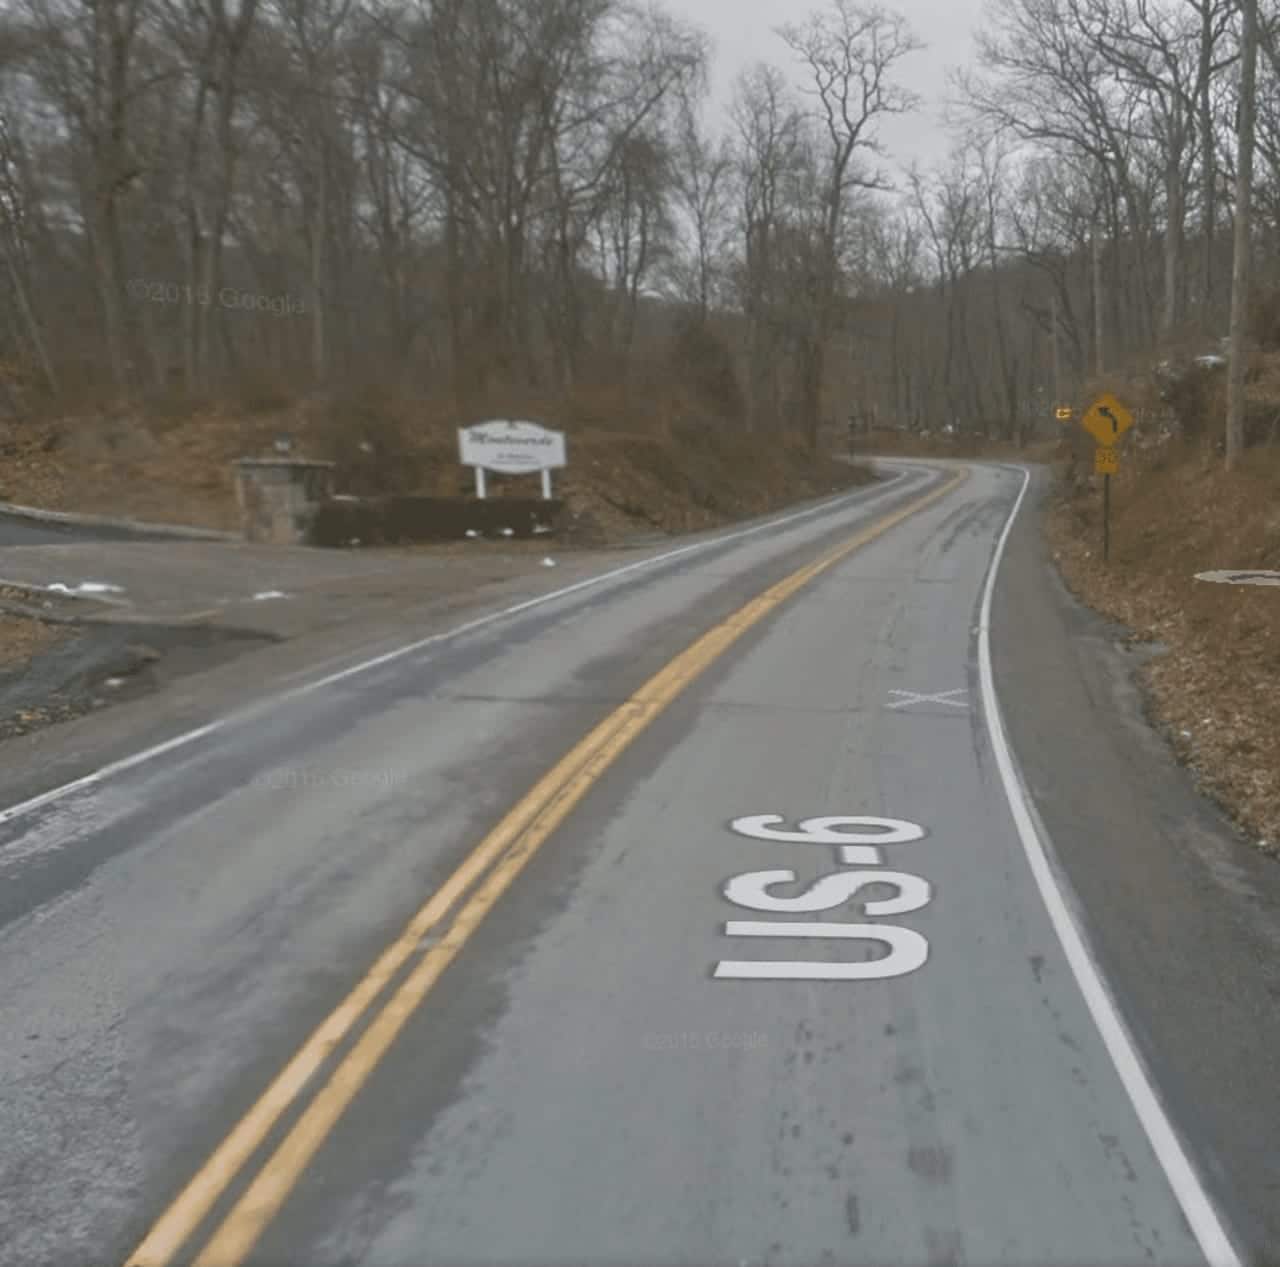 A look at the area where the head-on collision occurred Monday night in Cortlandt.